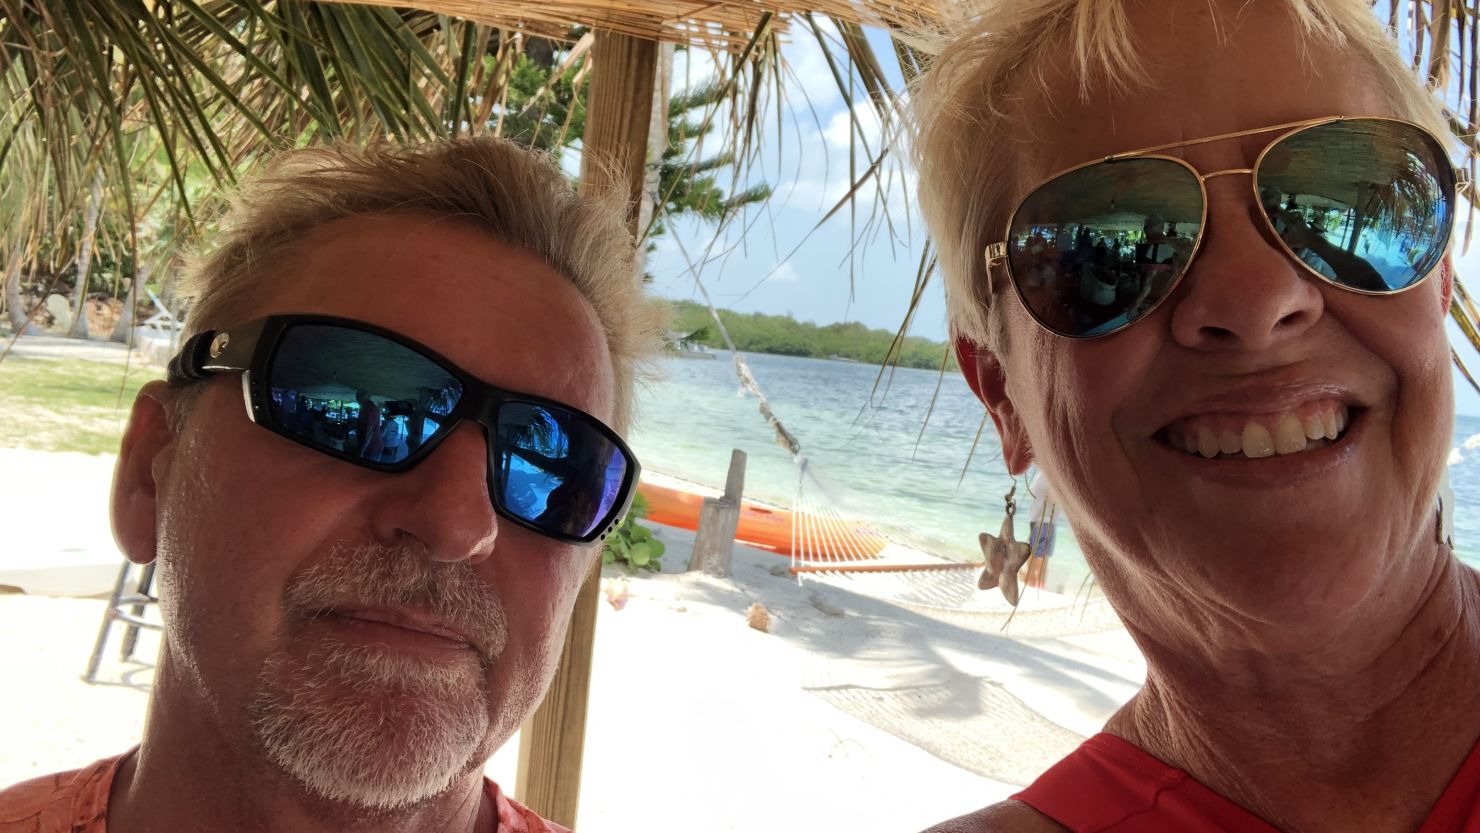 Norvell and Mark Slezycki purchased an acre of land in Great Guana Cay, an islet in the Bahamas, in 2003 and built a home there.